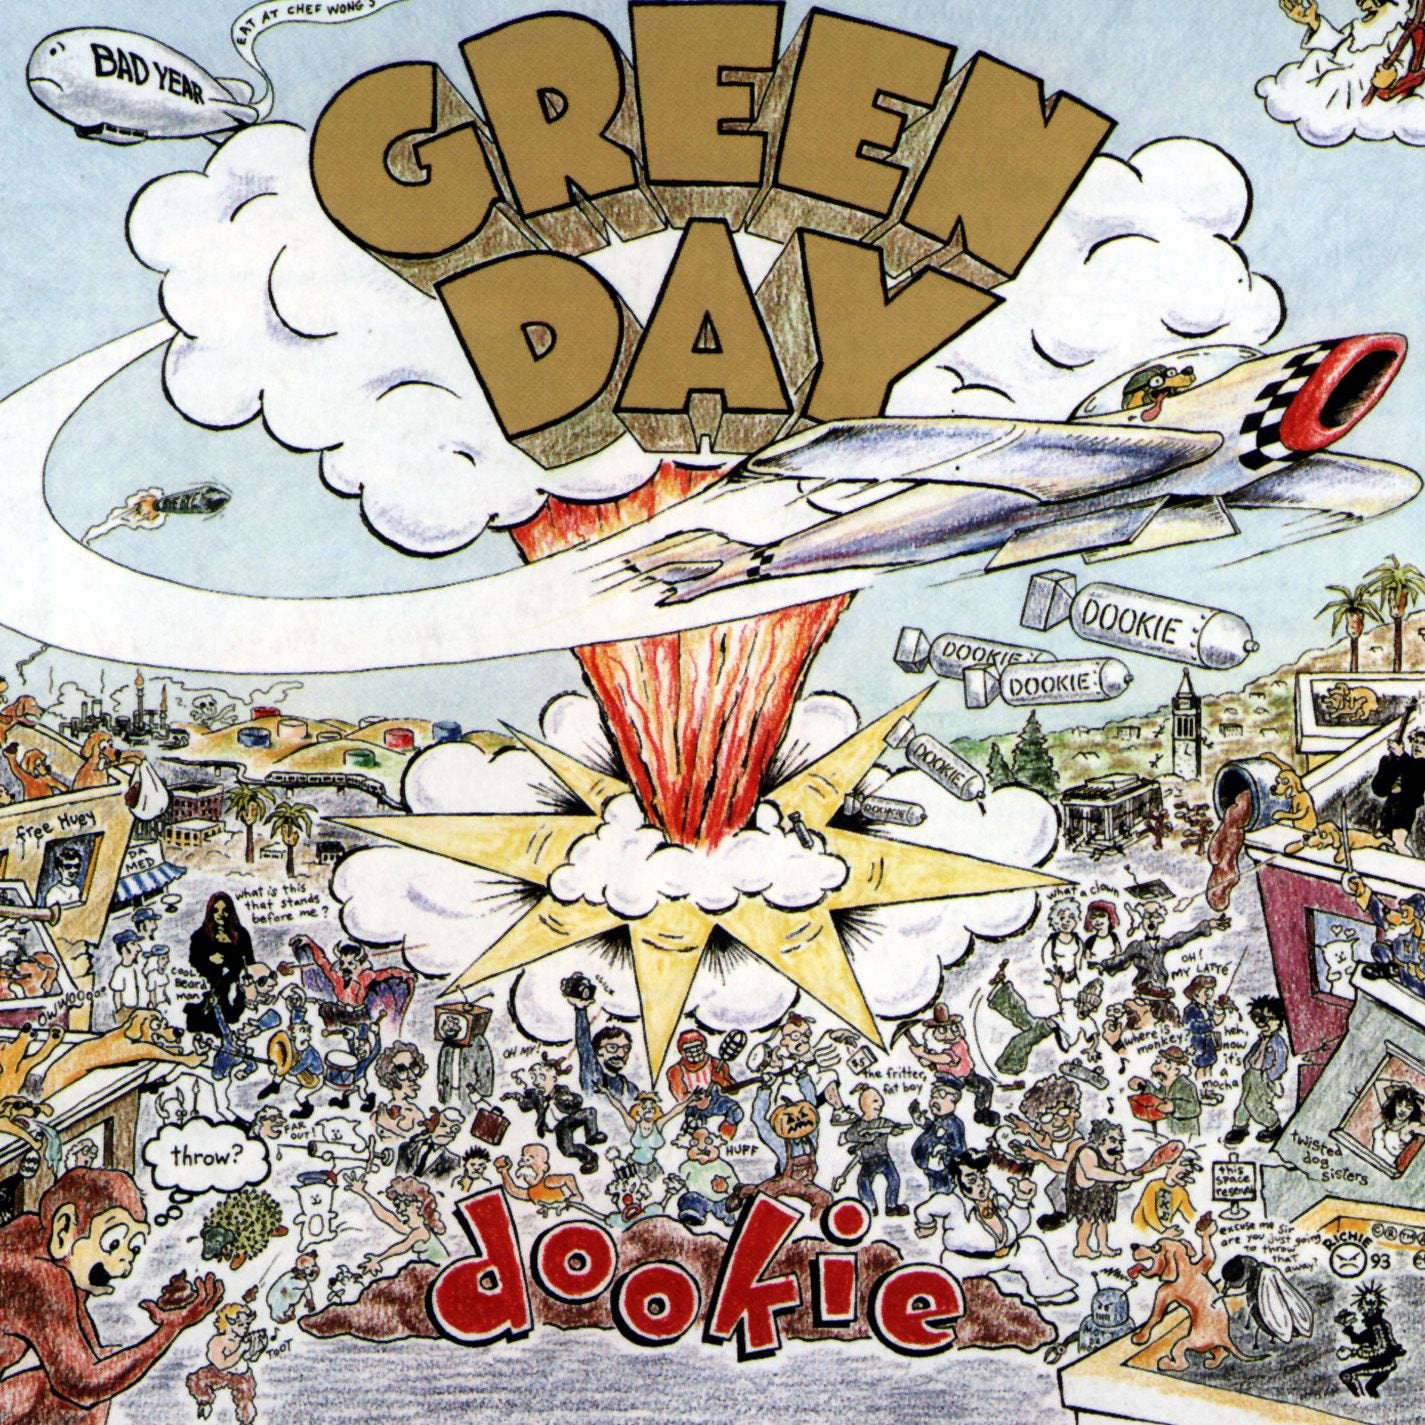 Green Day - Dookie (Limited Edition, Picture Disc) (LP) - Joco Records